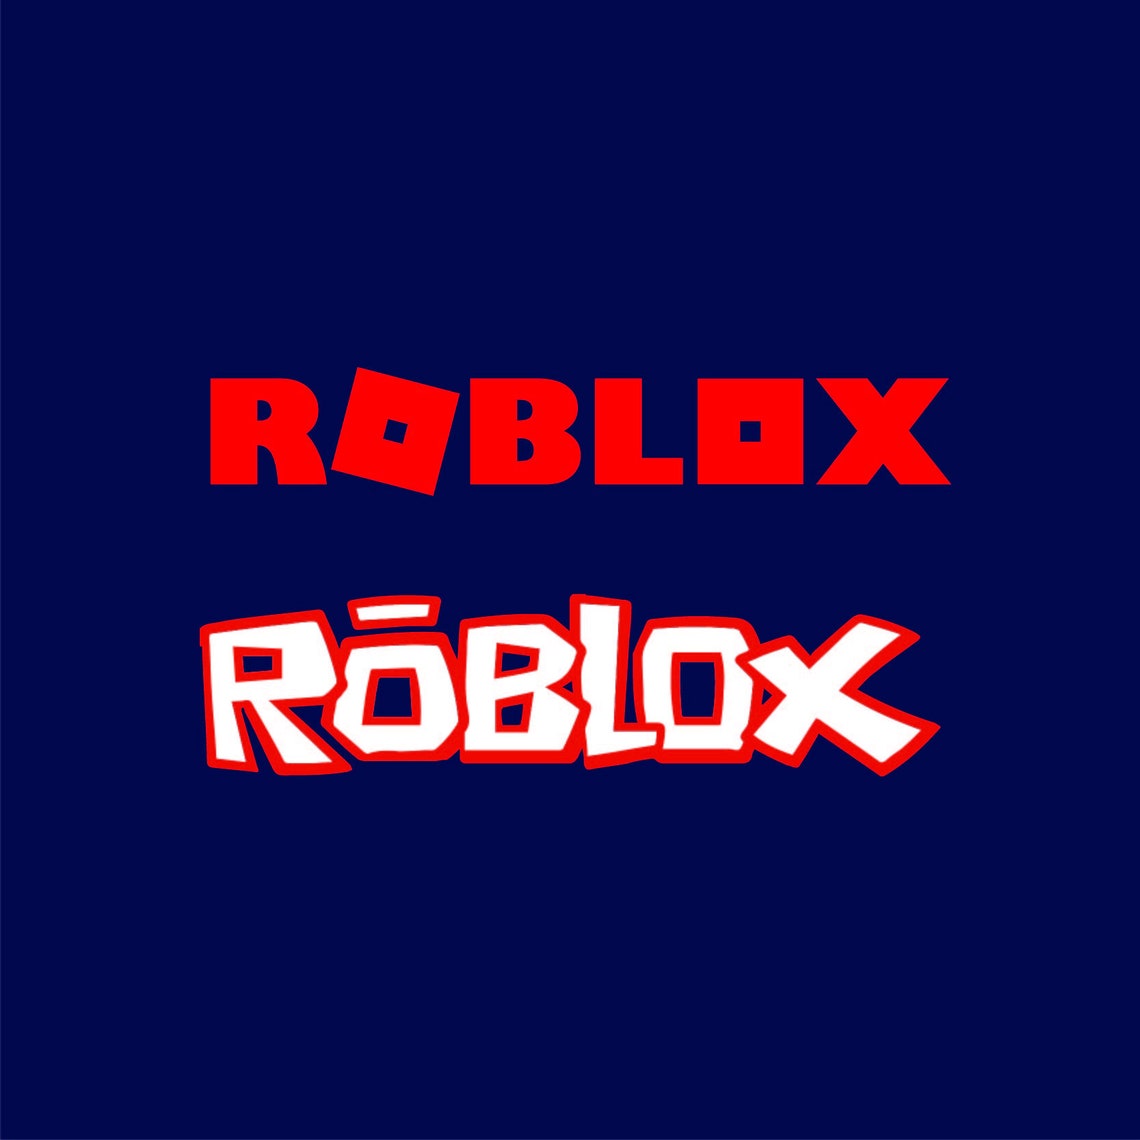 Roblox logo svg png vector for cricut and silhouette | Etsy